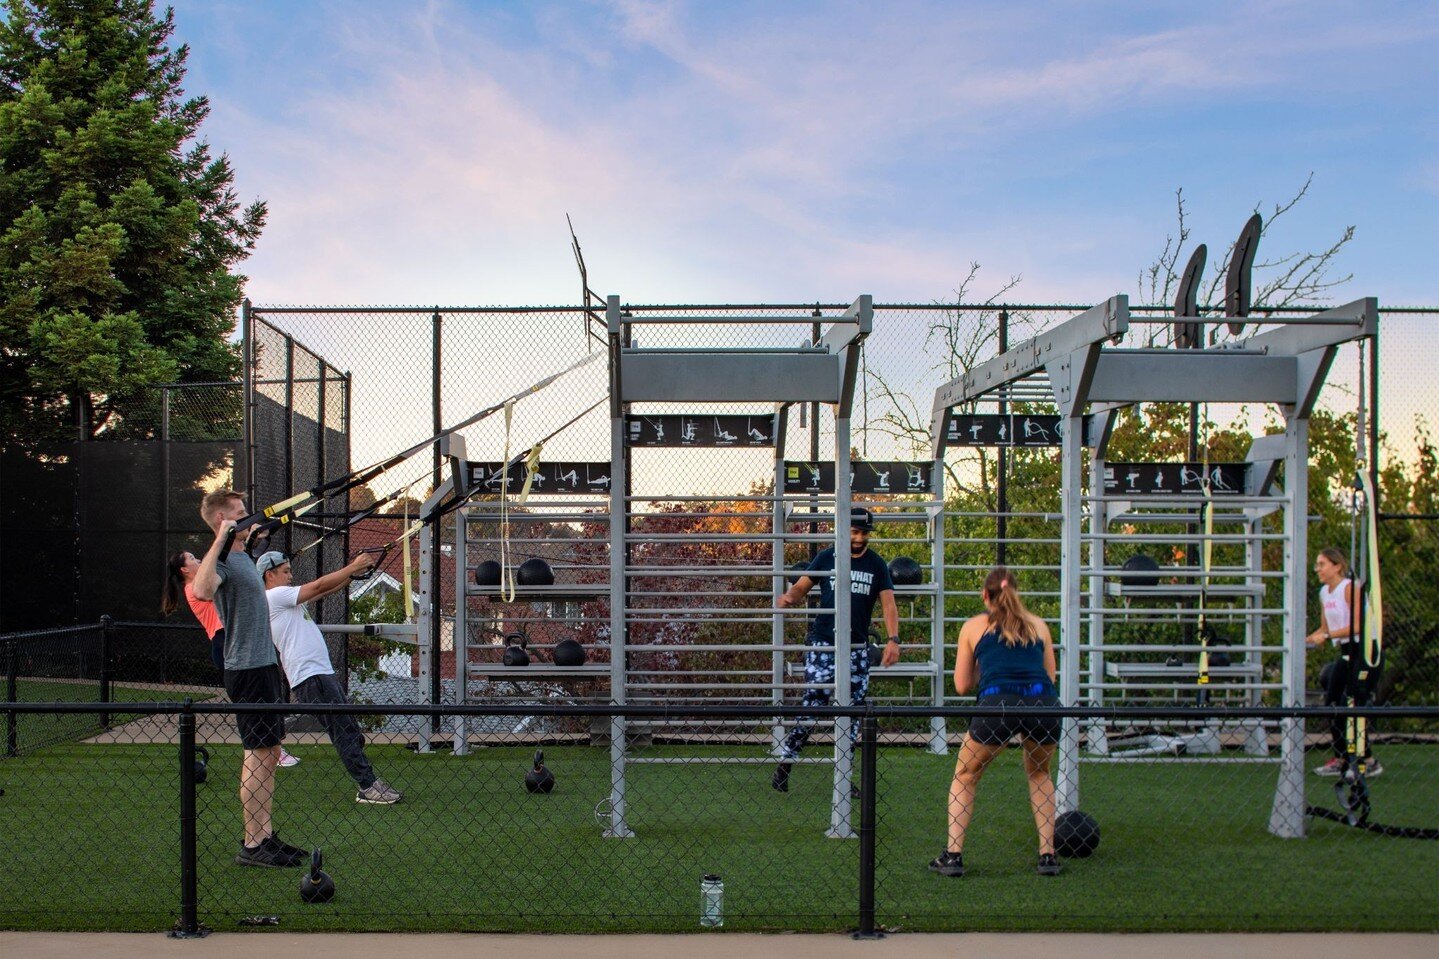 Recharge your fitness routine with an exhilarating outdoor workout at #SouthShoreApartments TRX gym 💪🌳